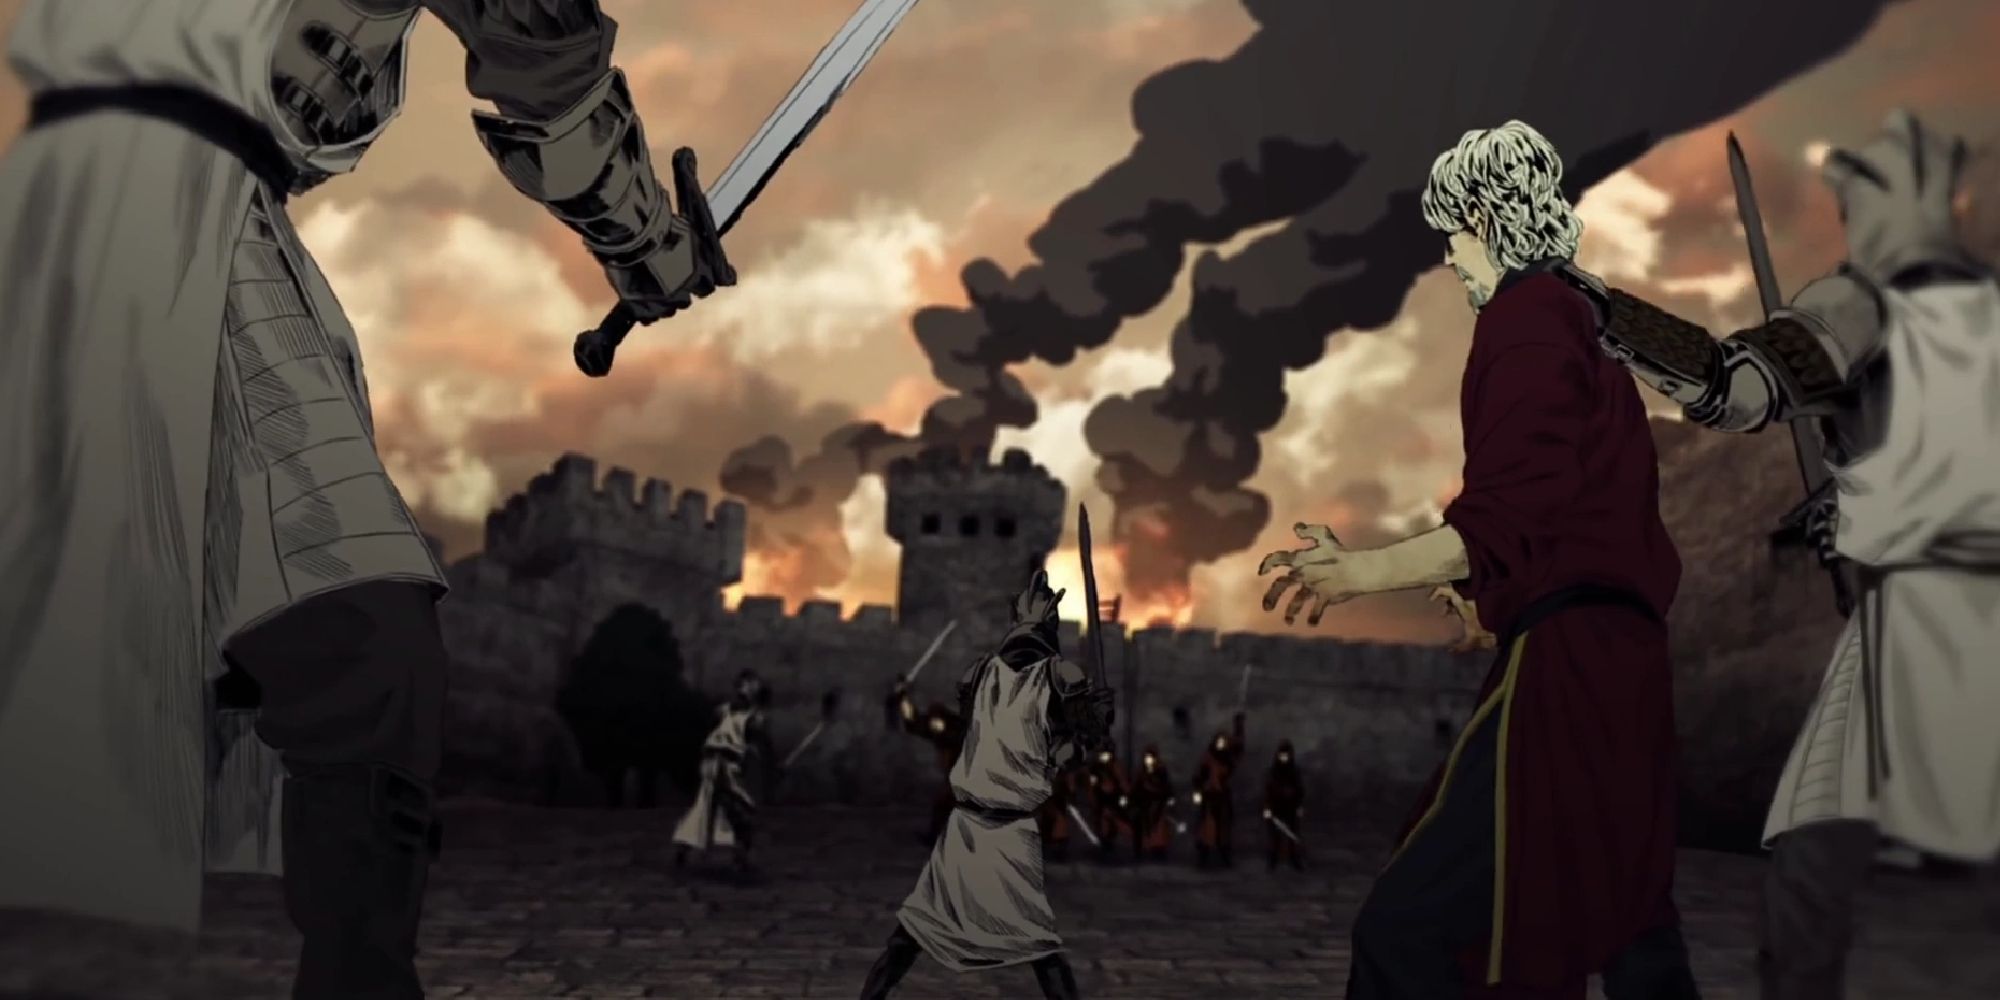 A depiction of the Faith Militant uprising in King's Landing in an animated cinematic